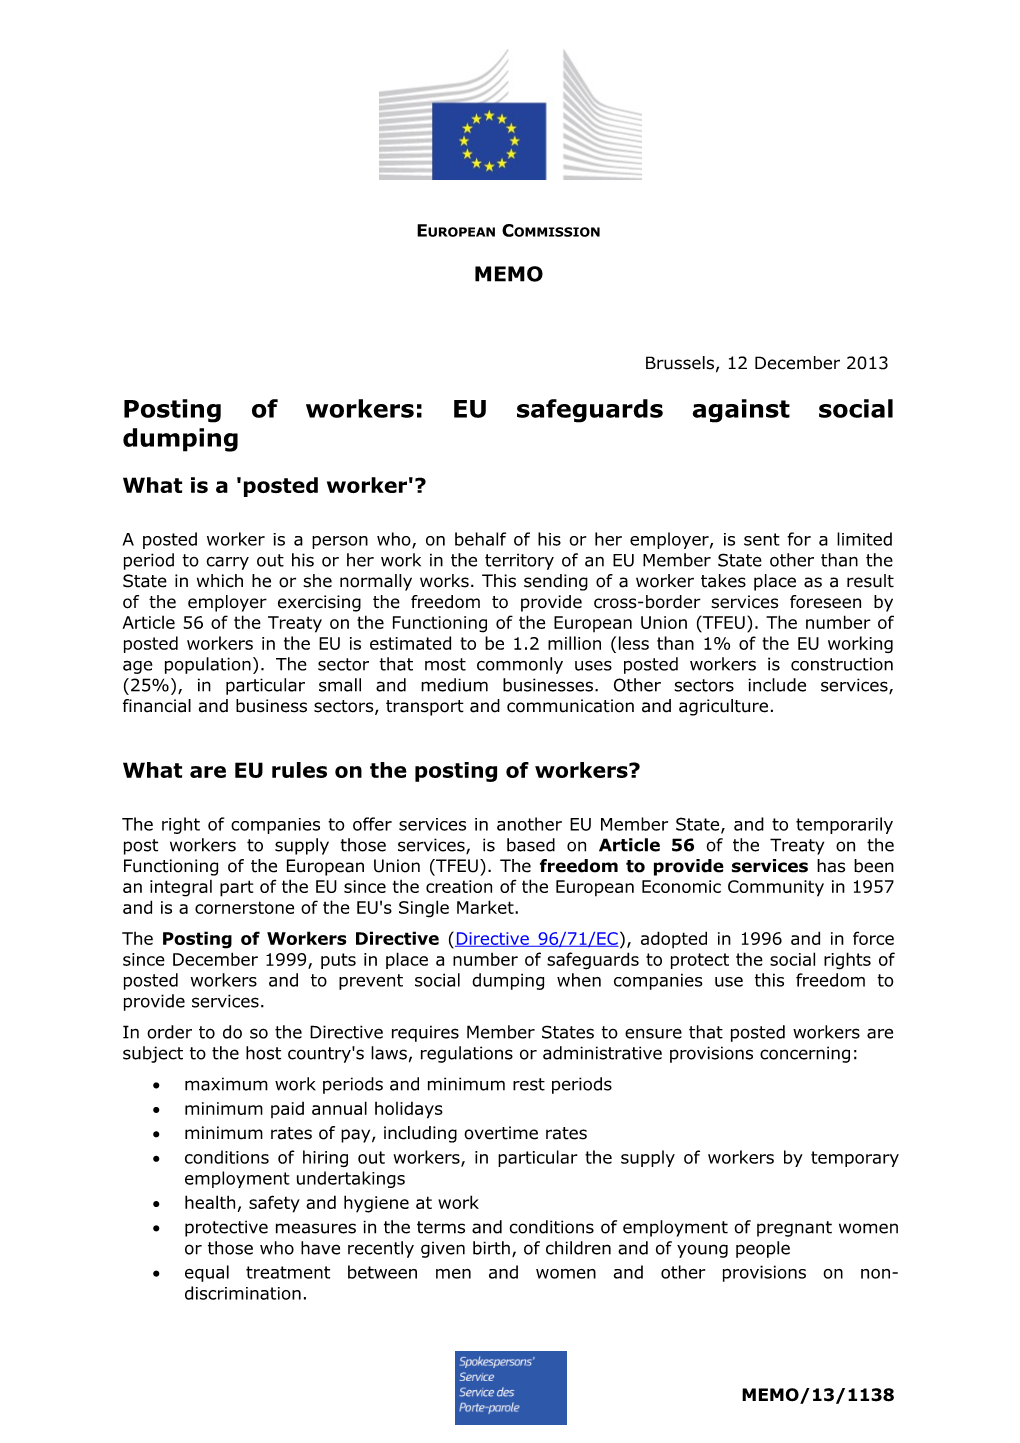 Posting of Workers: EU Safeguards Against Social Dumping